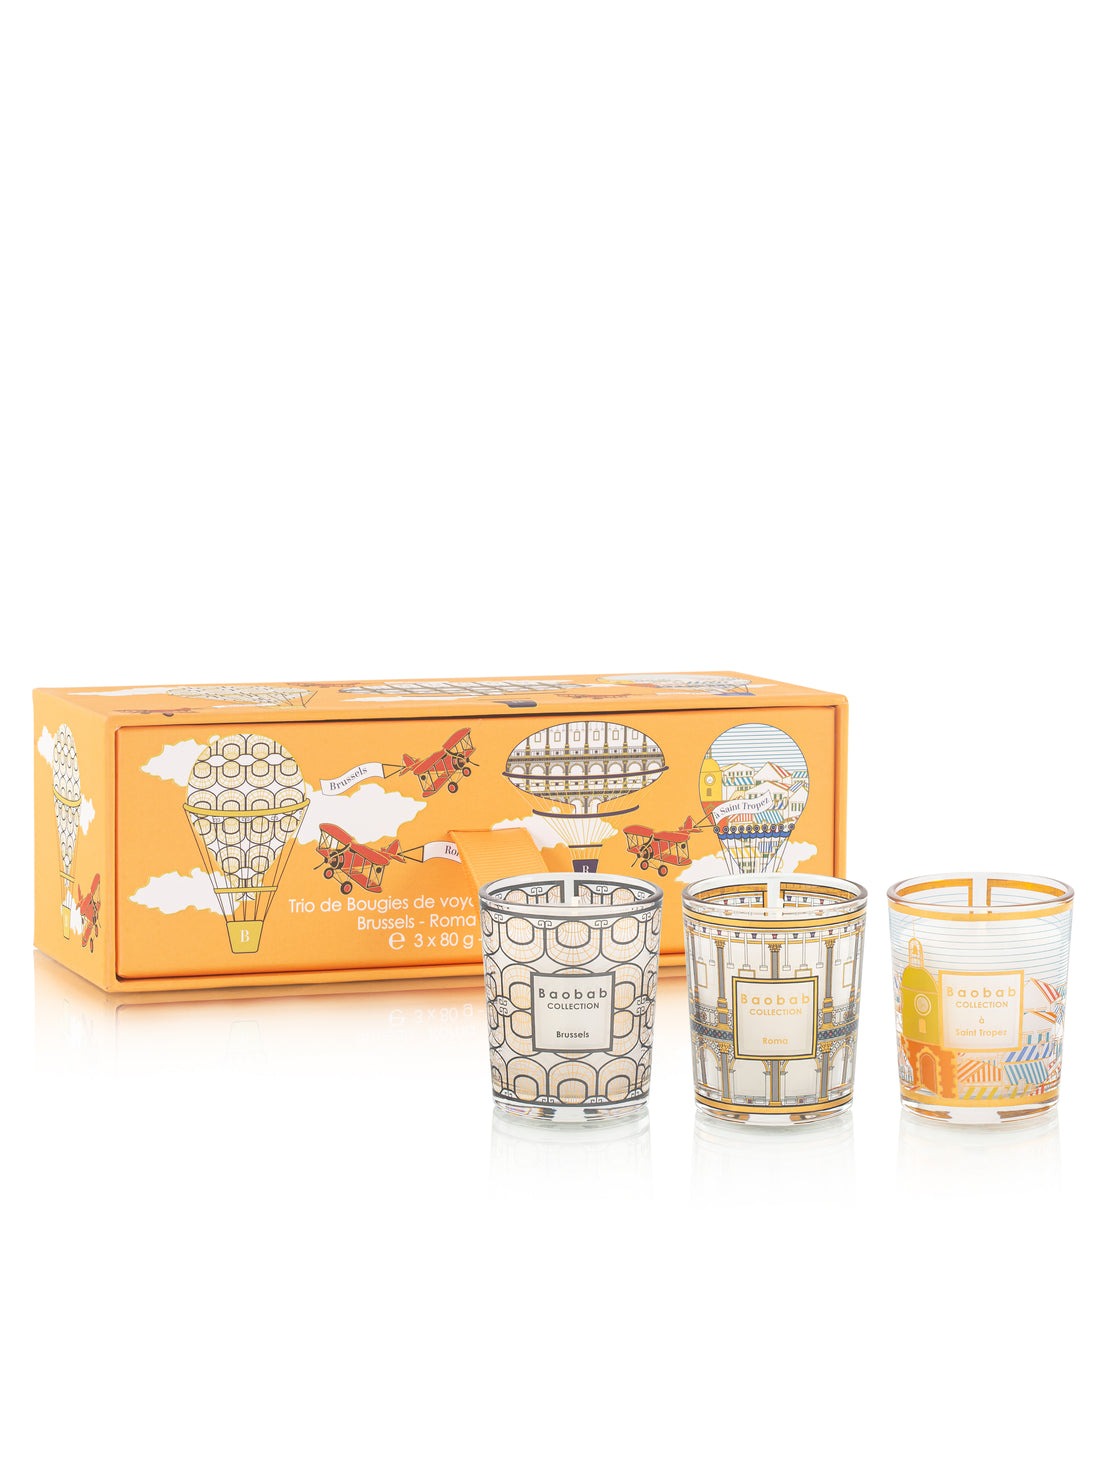 MY FIRST BAOBAB - TRIO TRAVEL CANDLES BRUSSELS-ROMA-SAINT TROPEZ